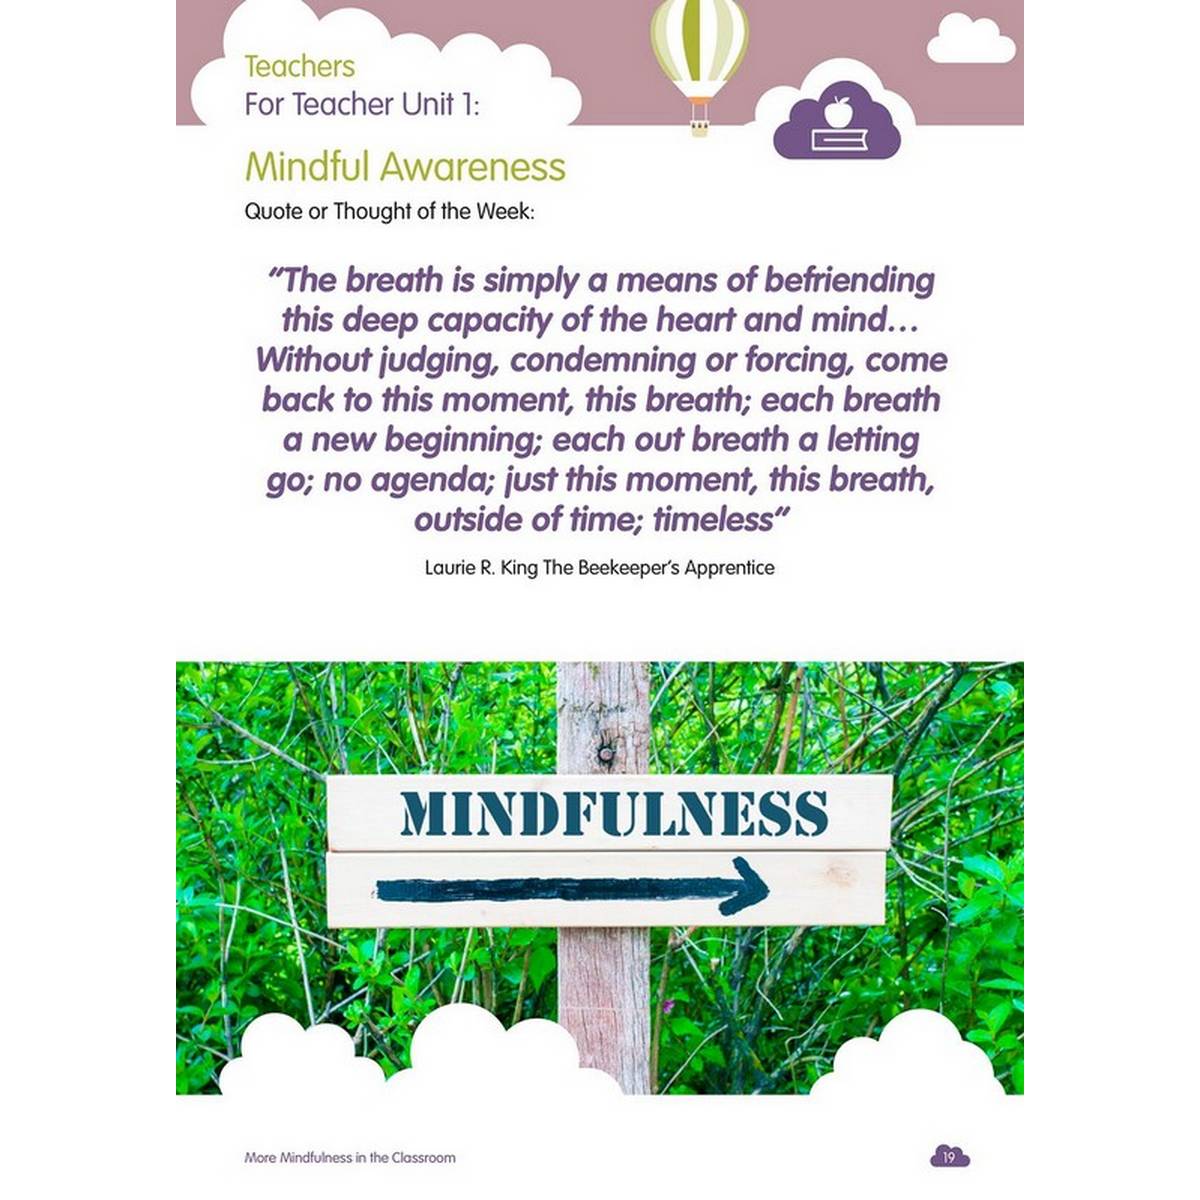 More Mindfulness in the Classroom Book and CDs: Promoting Wellbeing and Resilience in the Classroom